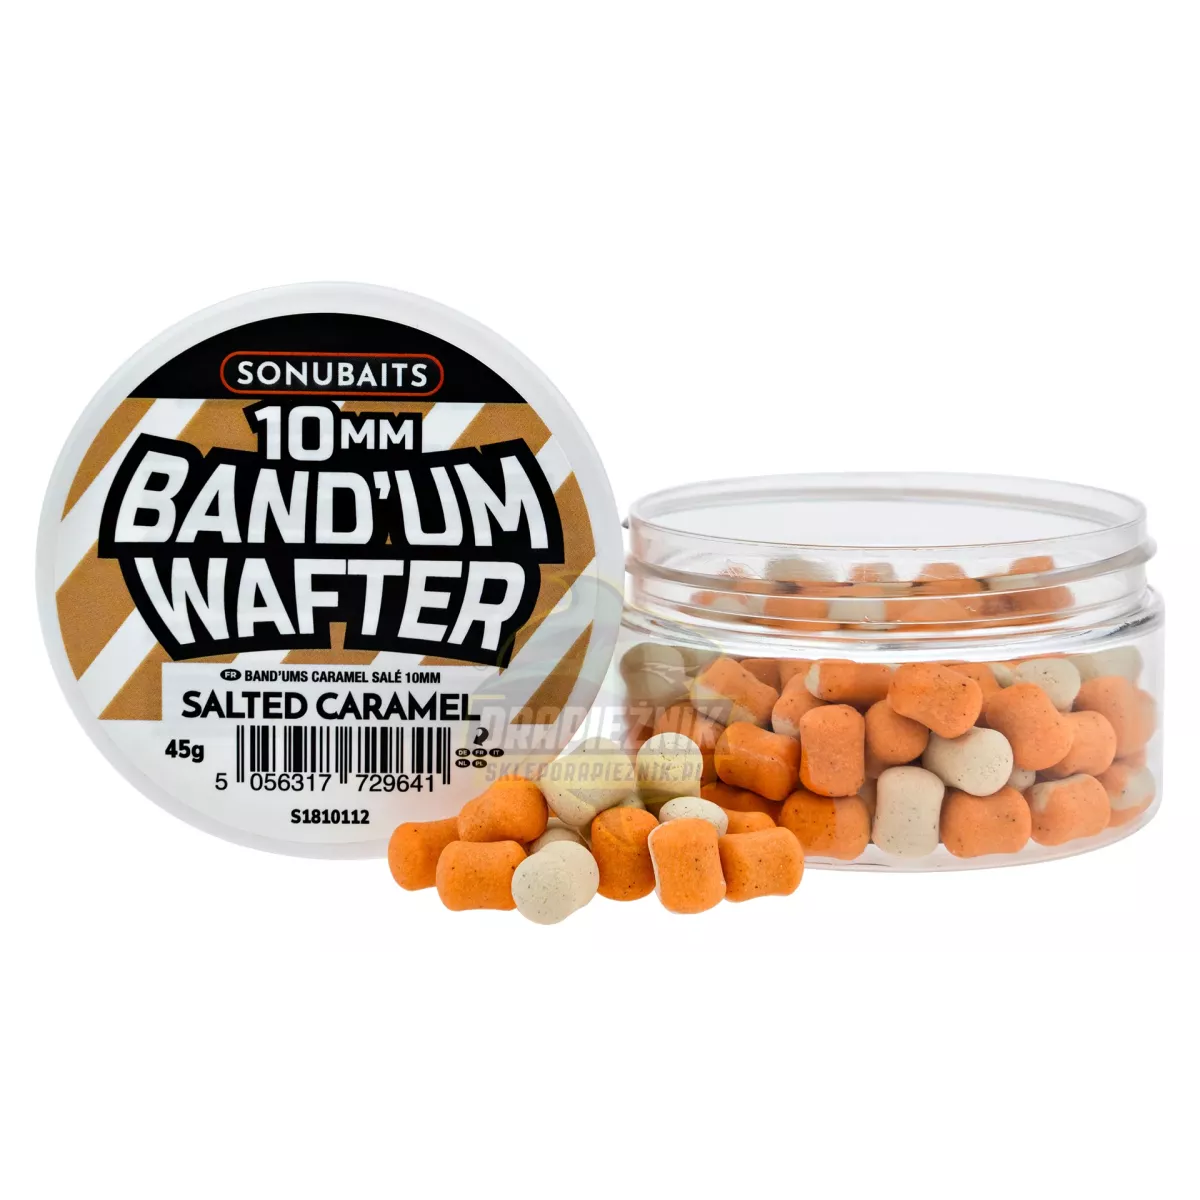 Sonubaits Band'Um Wafters 10mm - Salted Caramel